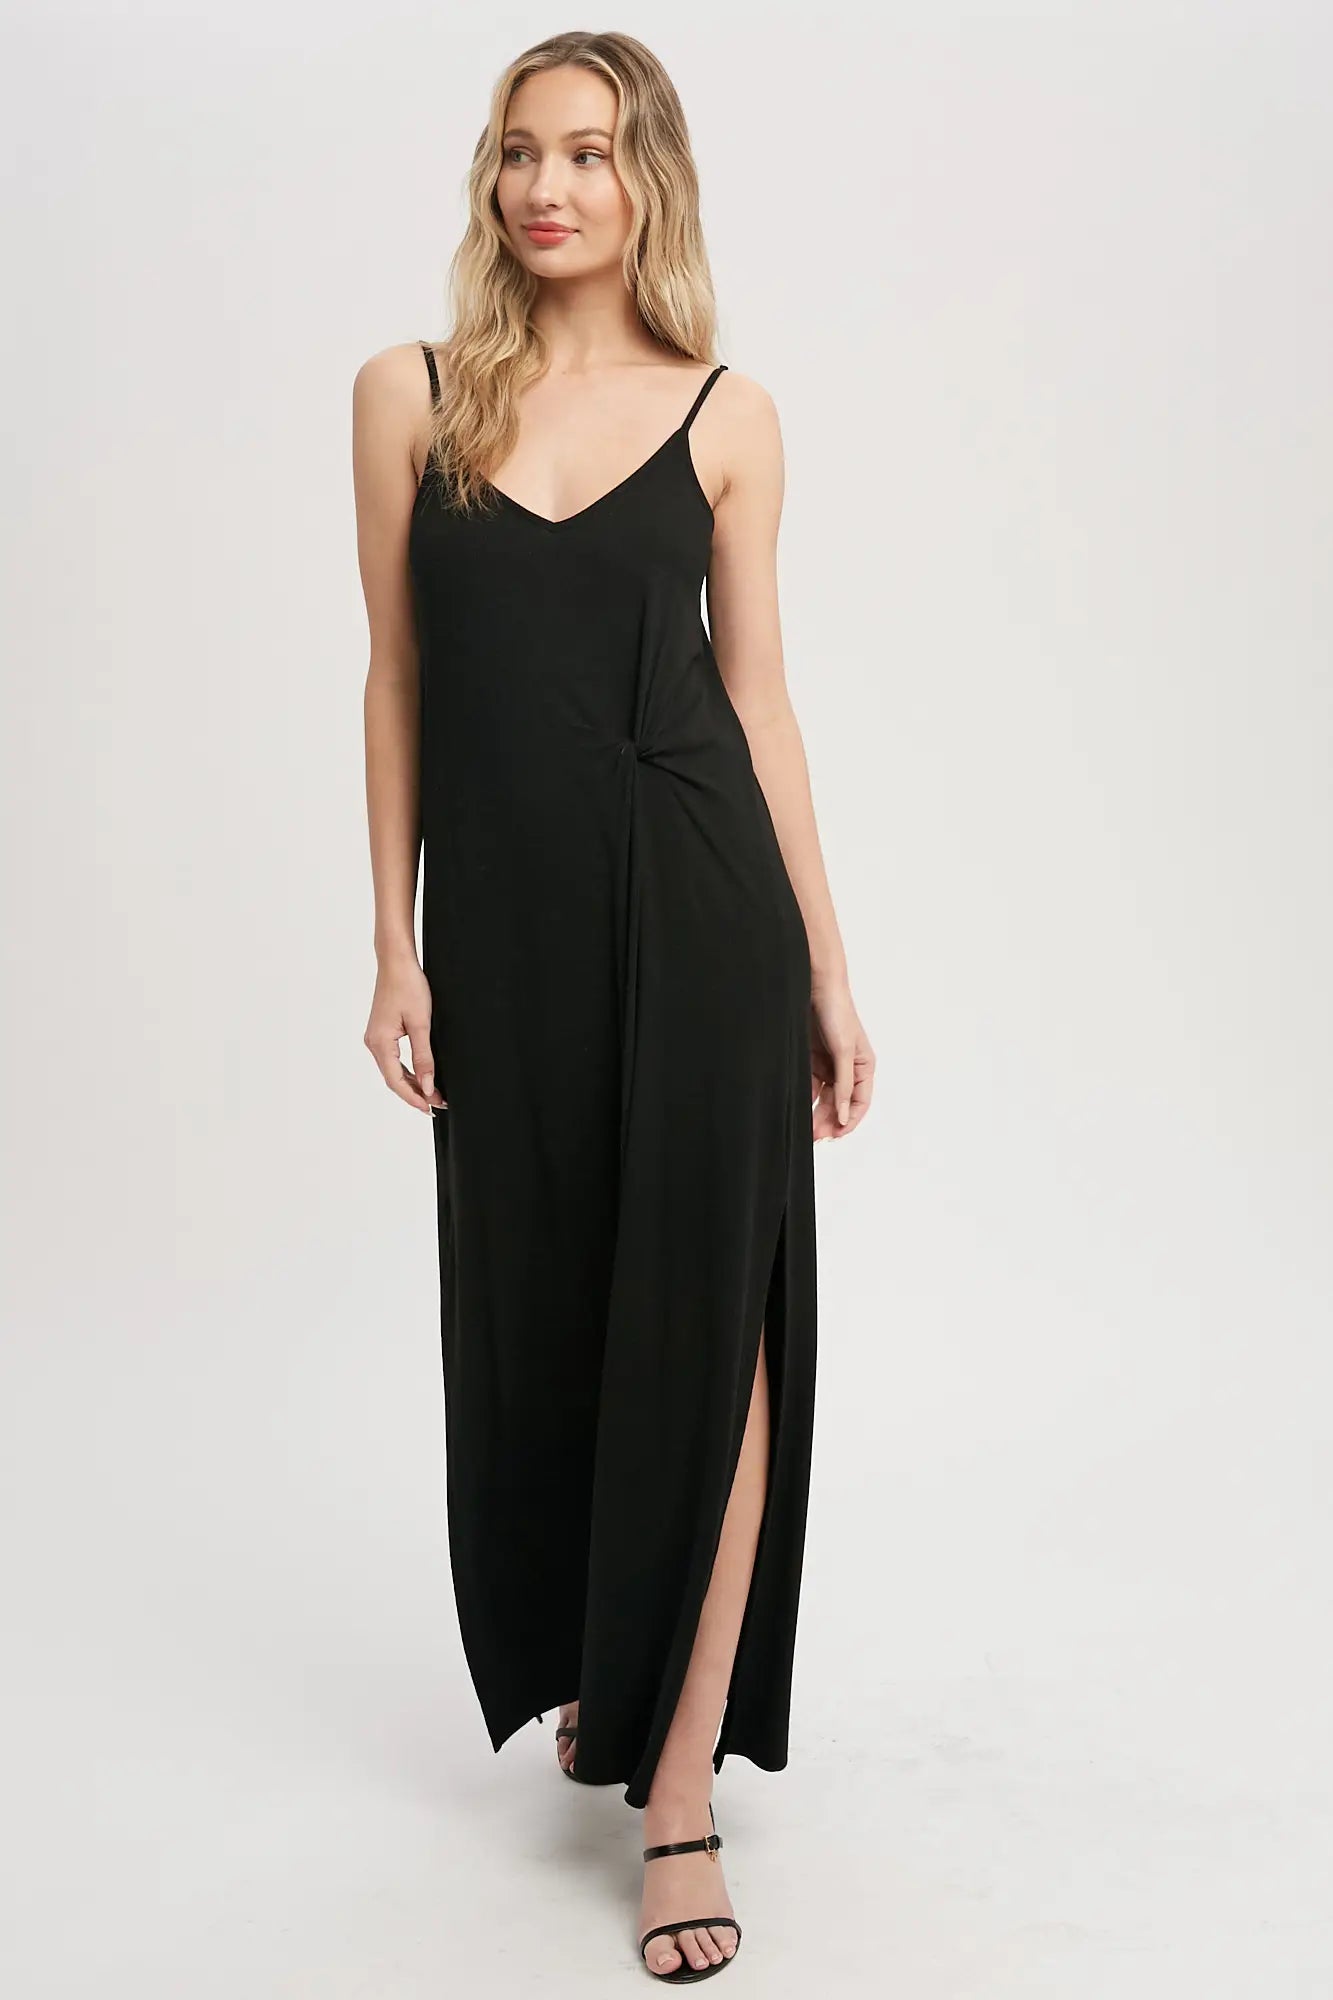 Pre-Loved Mavis, Tank style Knotted Jersey Maxi Dress, Black, New With Tags